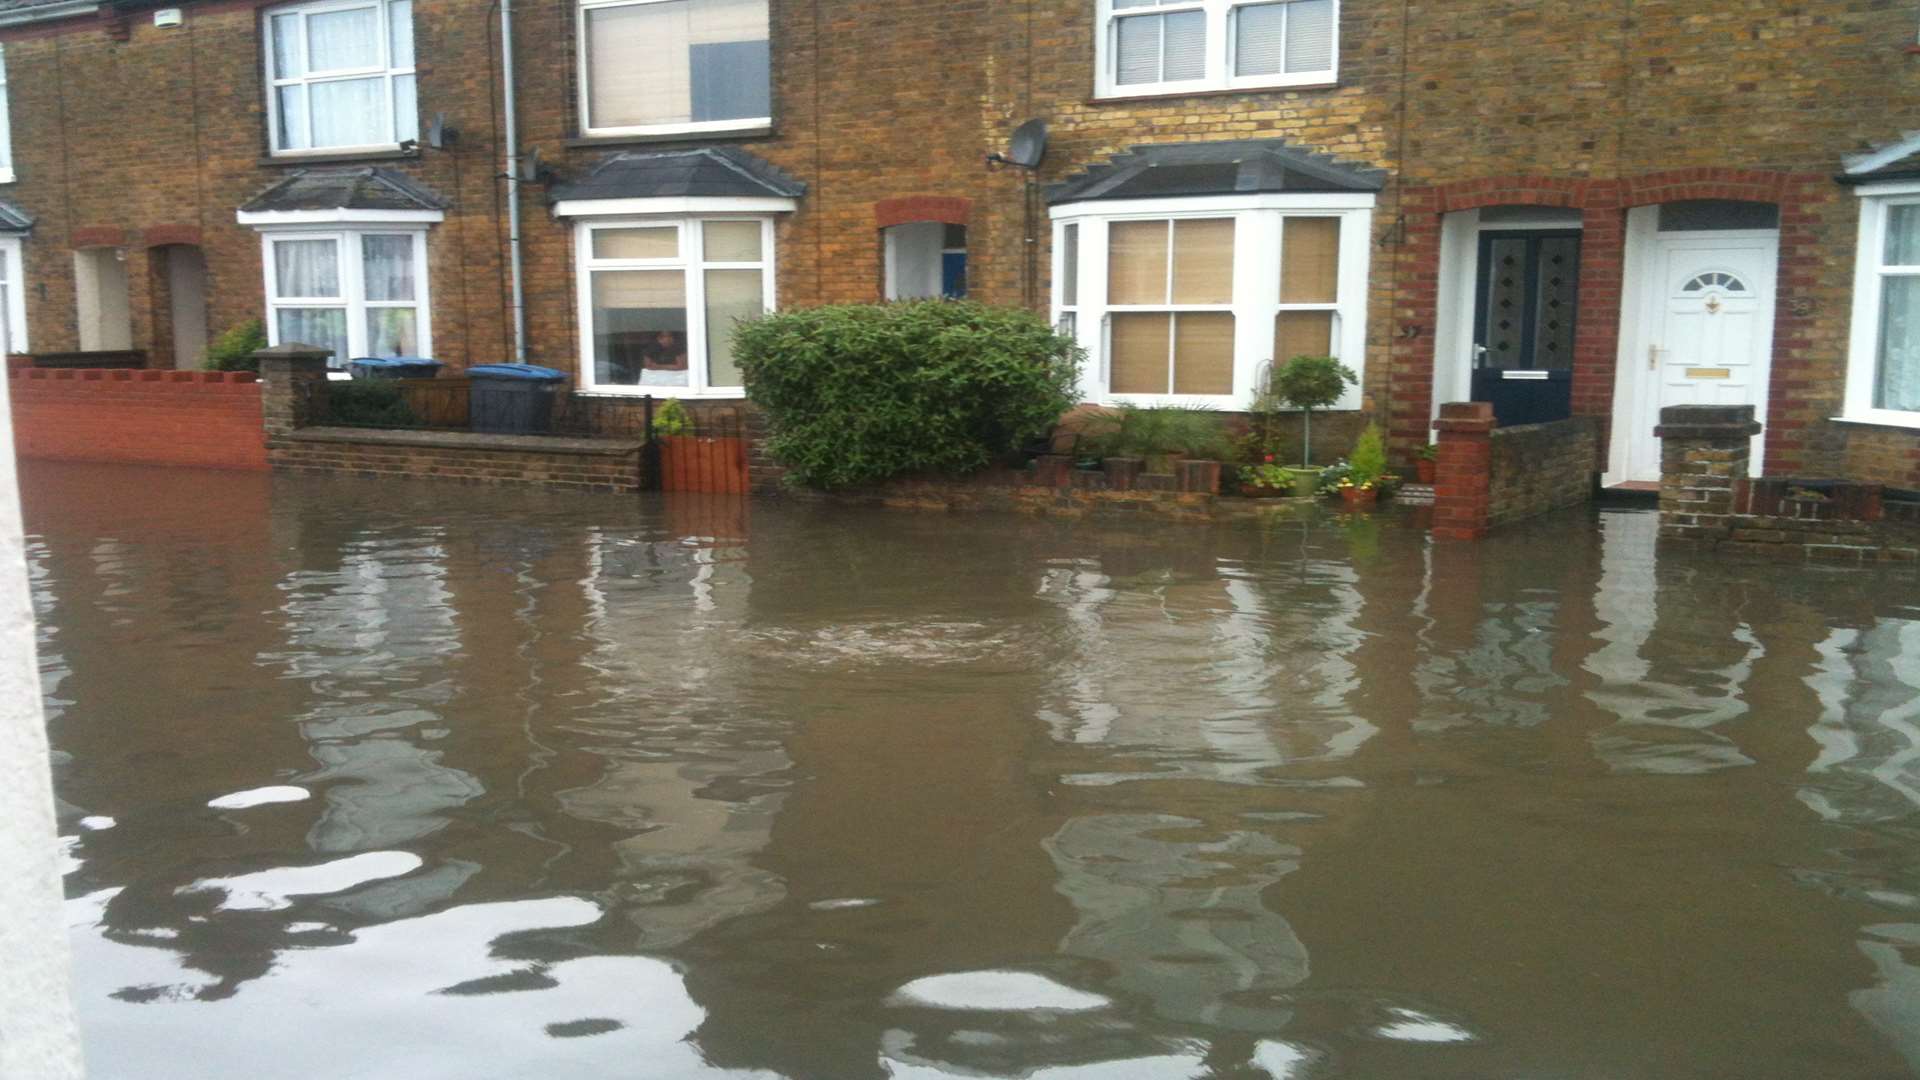 Nick Cavell took this picture of recent flooding in Albert Road